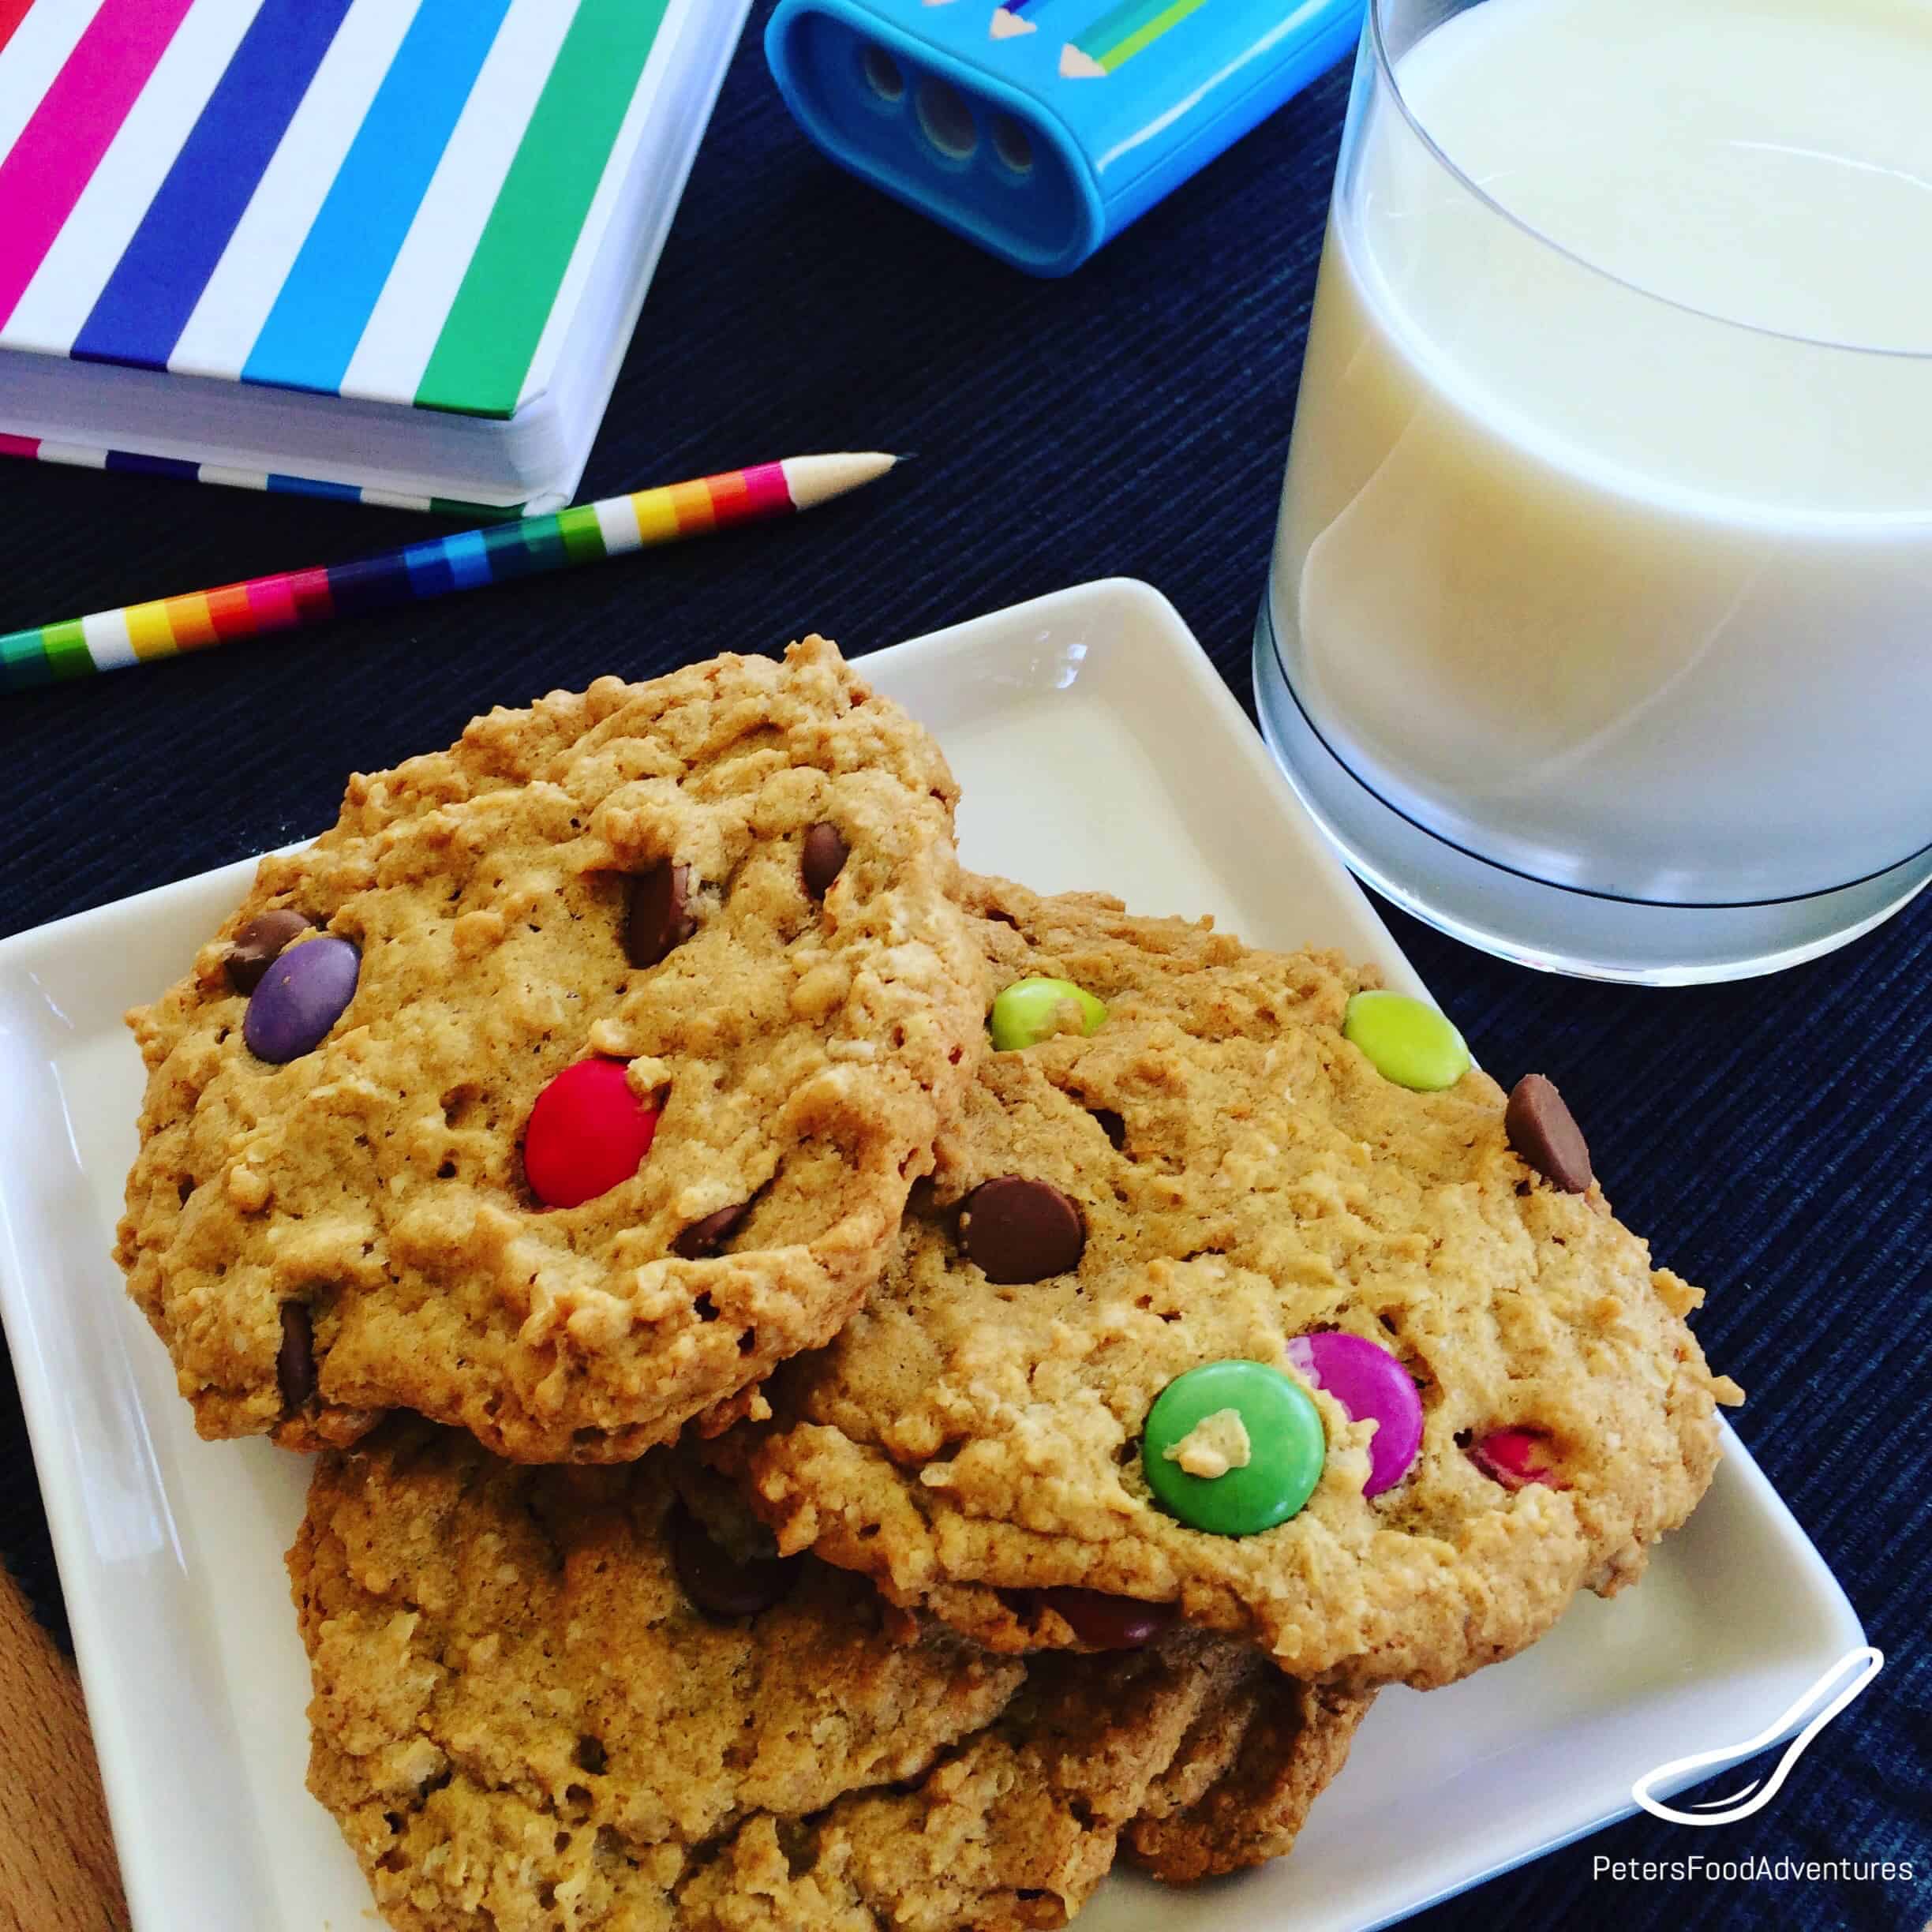 The Best Monster Cookies recipe you'll try. Everything you want in a cookie like oats, smarties, chocolate chips, peanut butter! This large batch recipe makes enough to feed a small army!